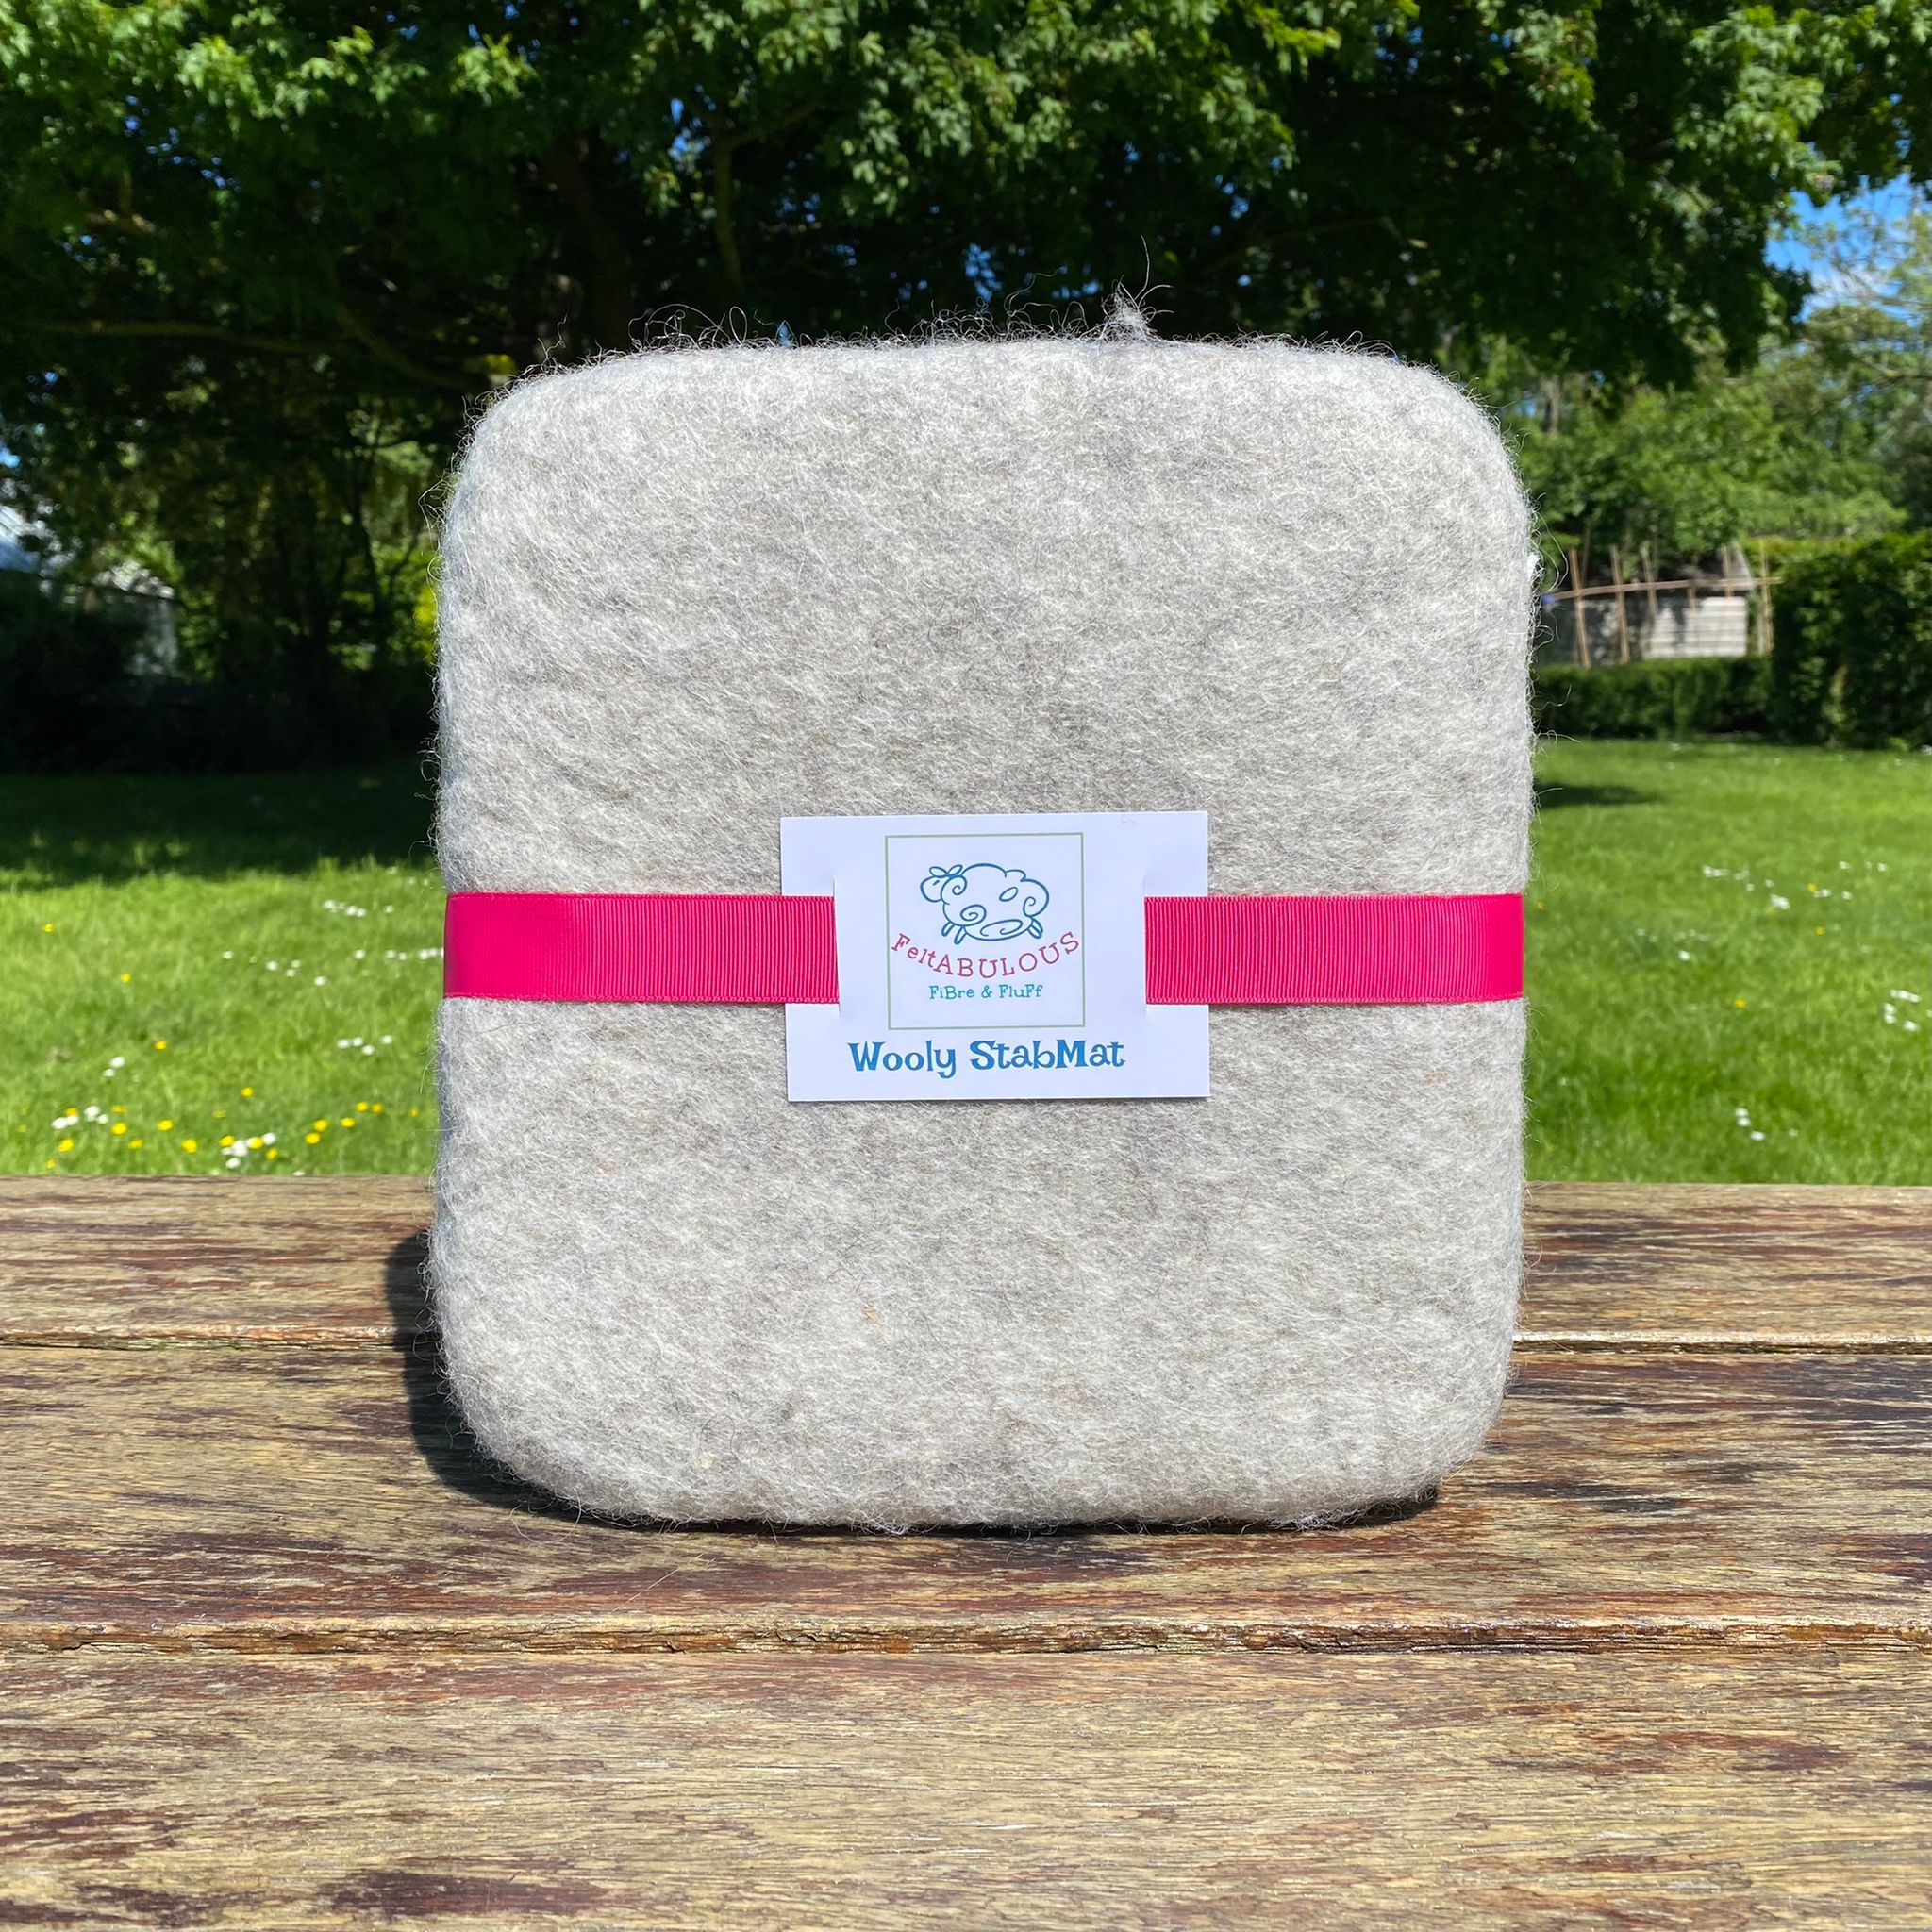 FeltABULOUS Wooly StabMat - PURE WOOL - Handmade in UK, Lincolnshire